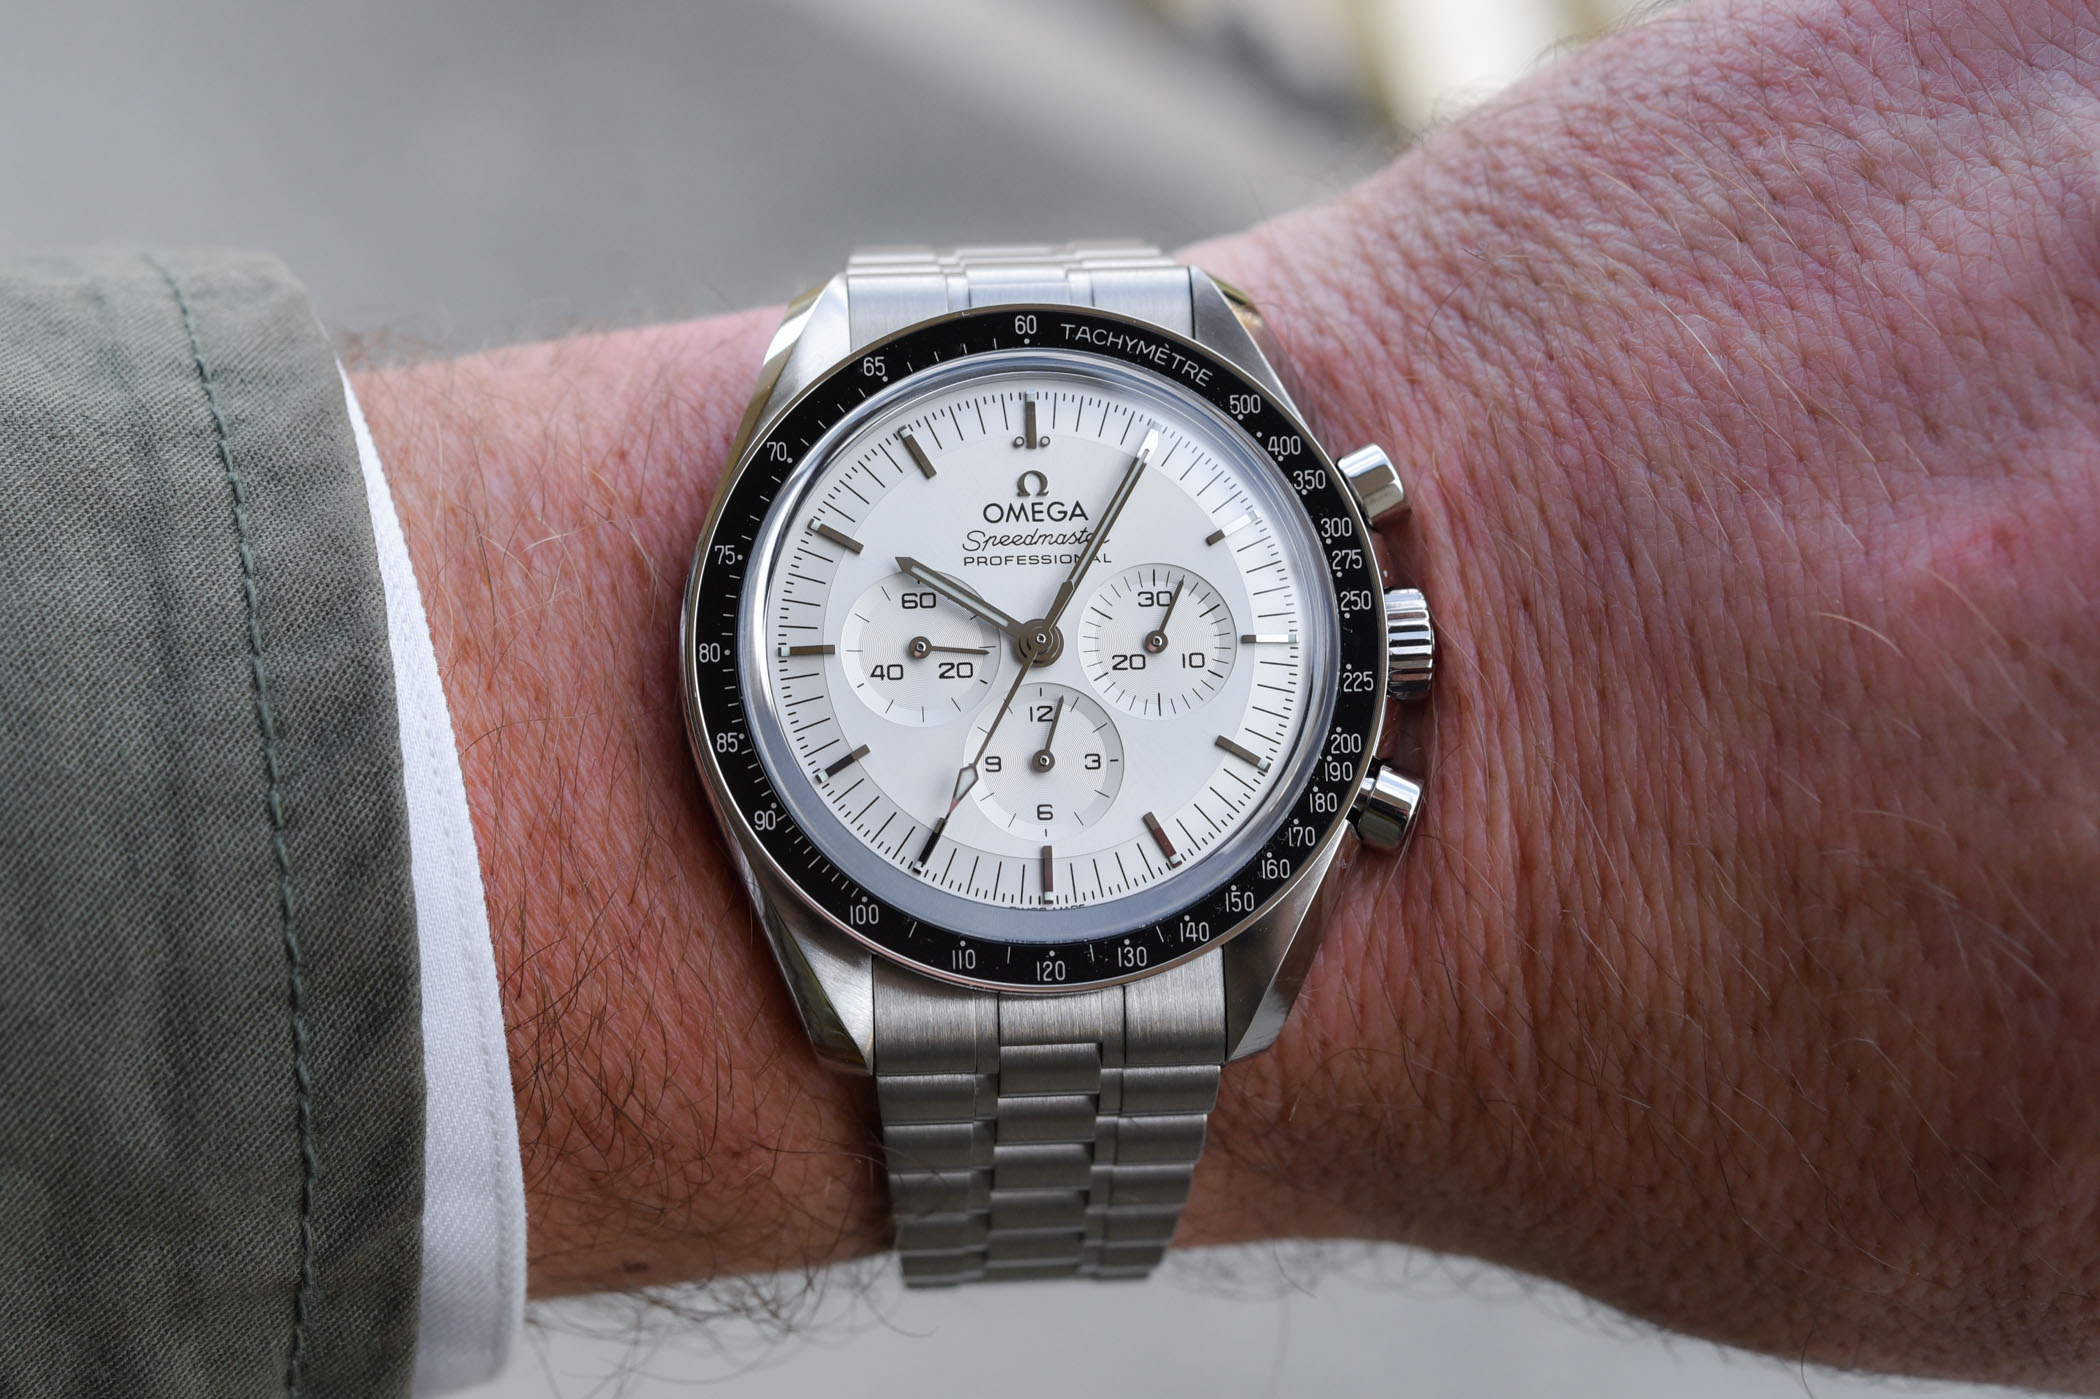 Omega Speedmaster Moonwatch Professional Co-Axial Master Chronometer Canopus Gold Silver dial 310.60.42.50.02.001